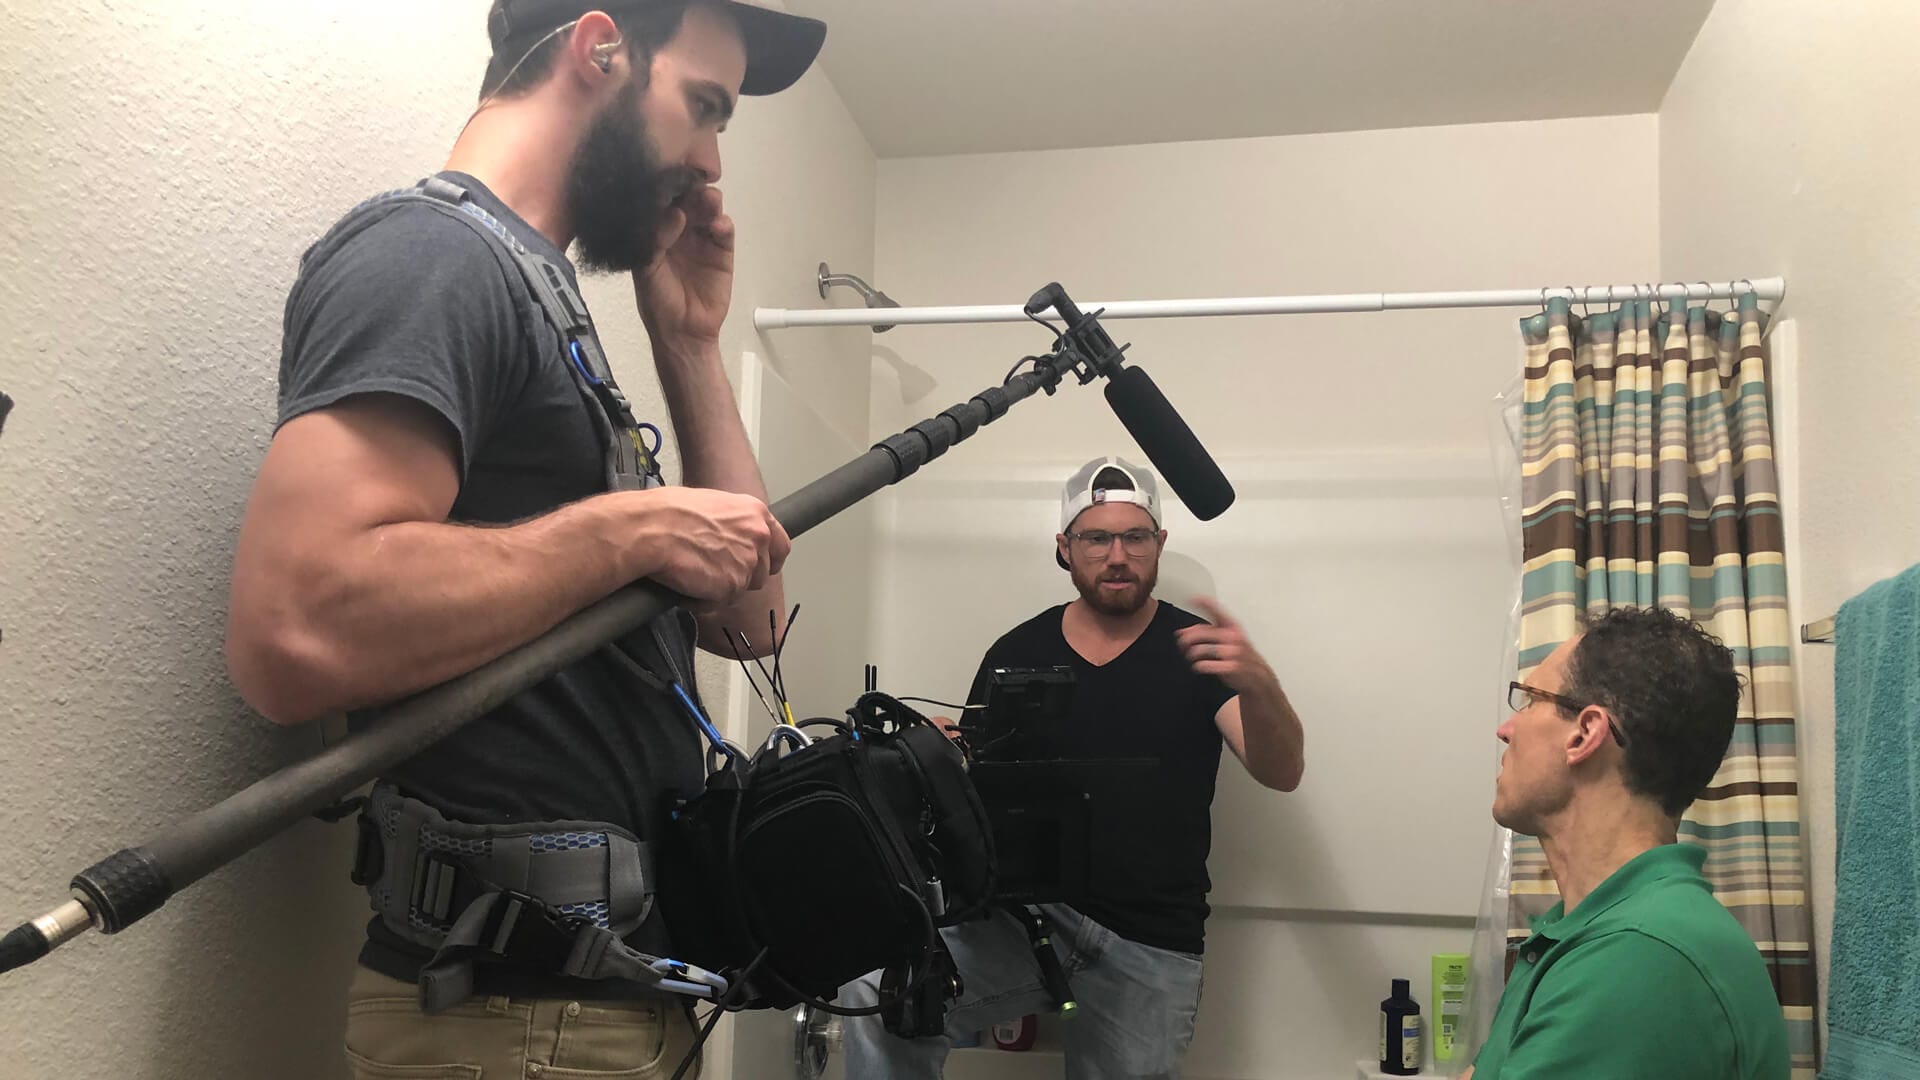 Takl Commercial Ad Behind the Scenes Boom Operator - Fort Mill SC